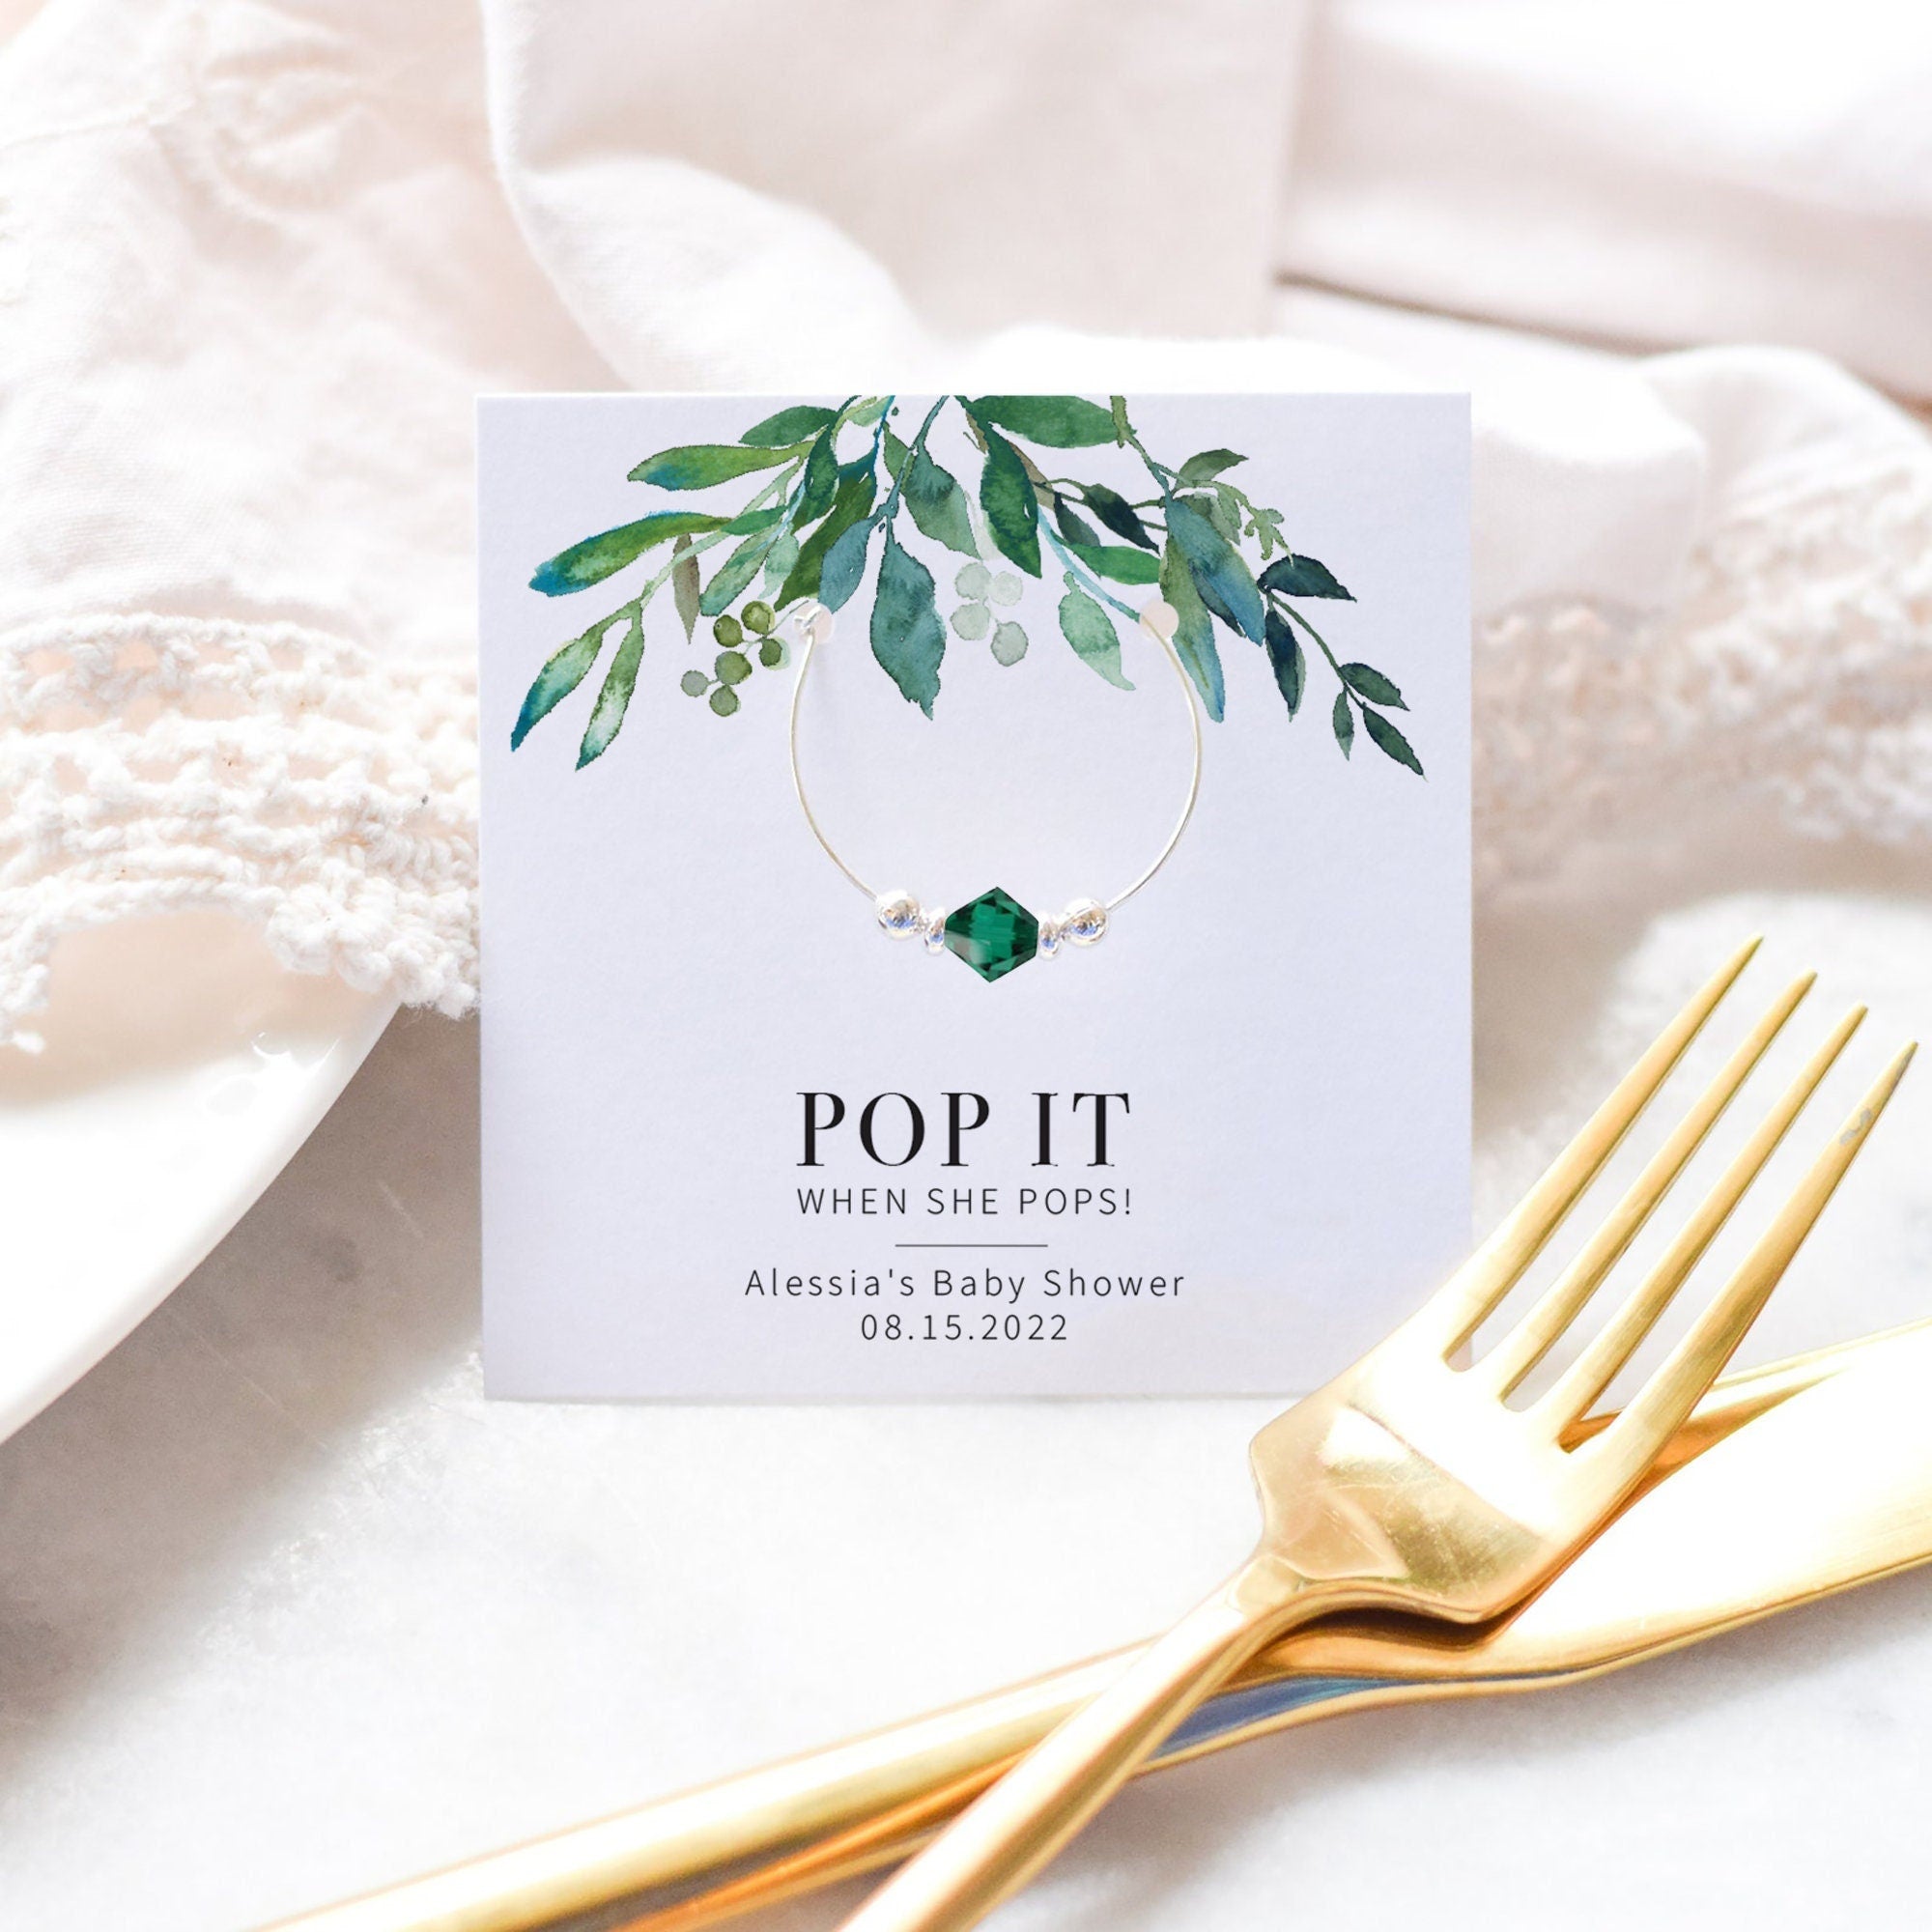 Pop It When She Pops Wine Charm Favors. Greenery Baby Shower Favors, Sip and See Baby Shower Favors, Thank You Baby Shower Guest Gifts G100